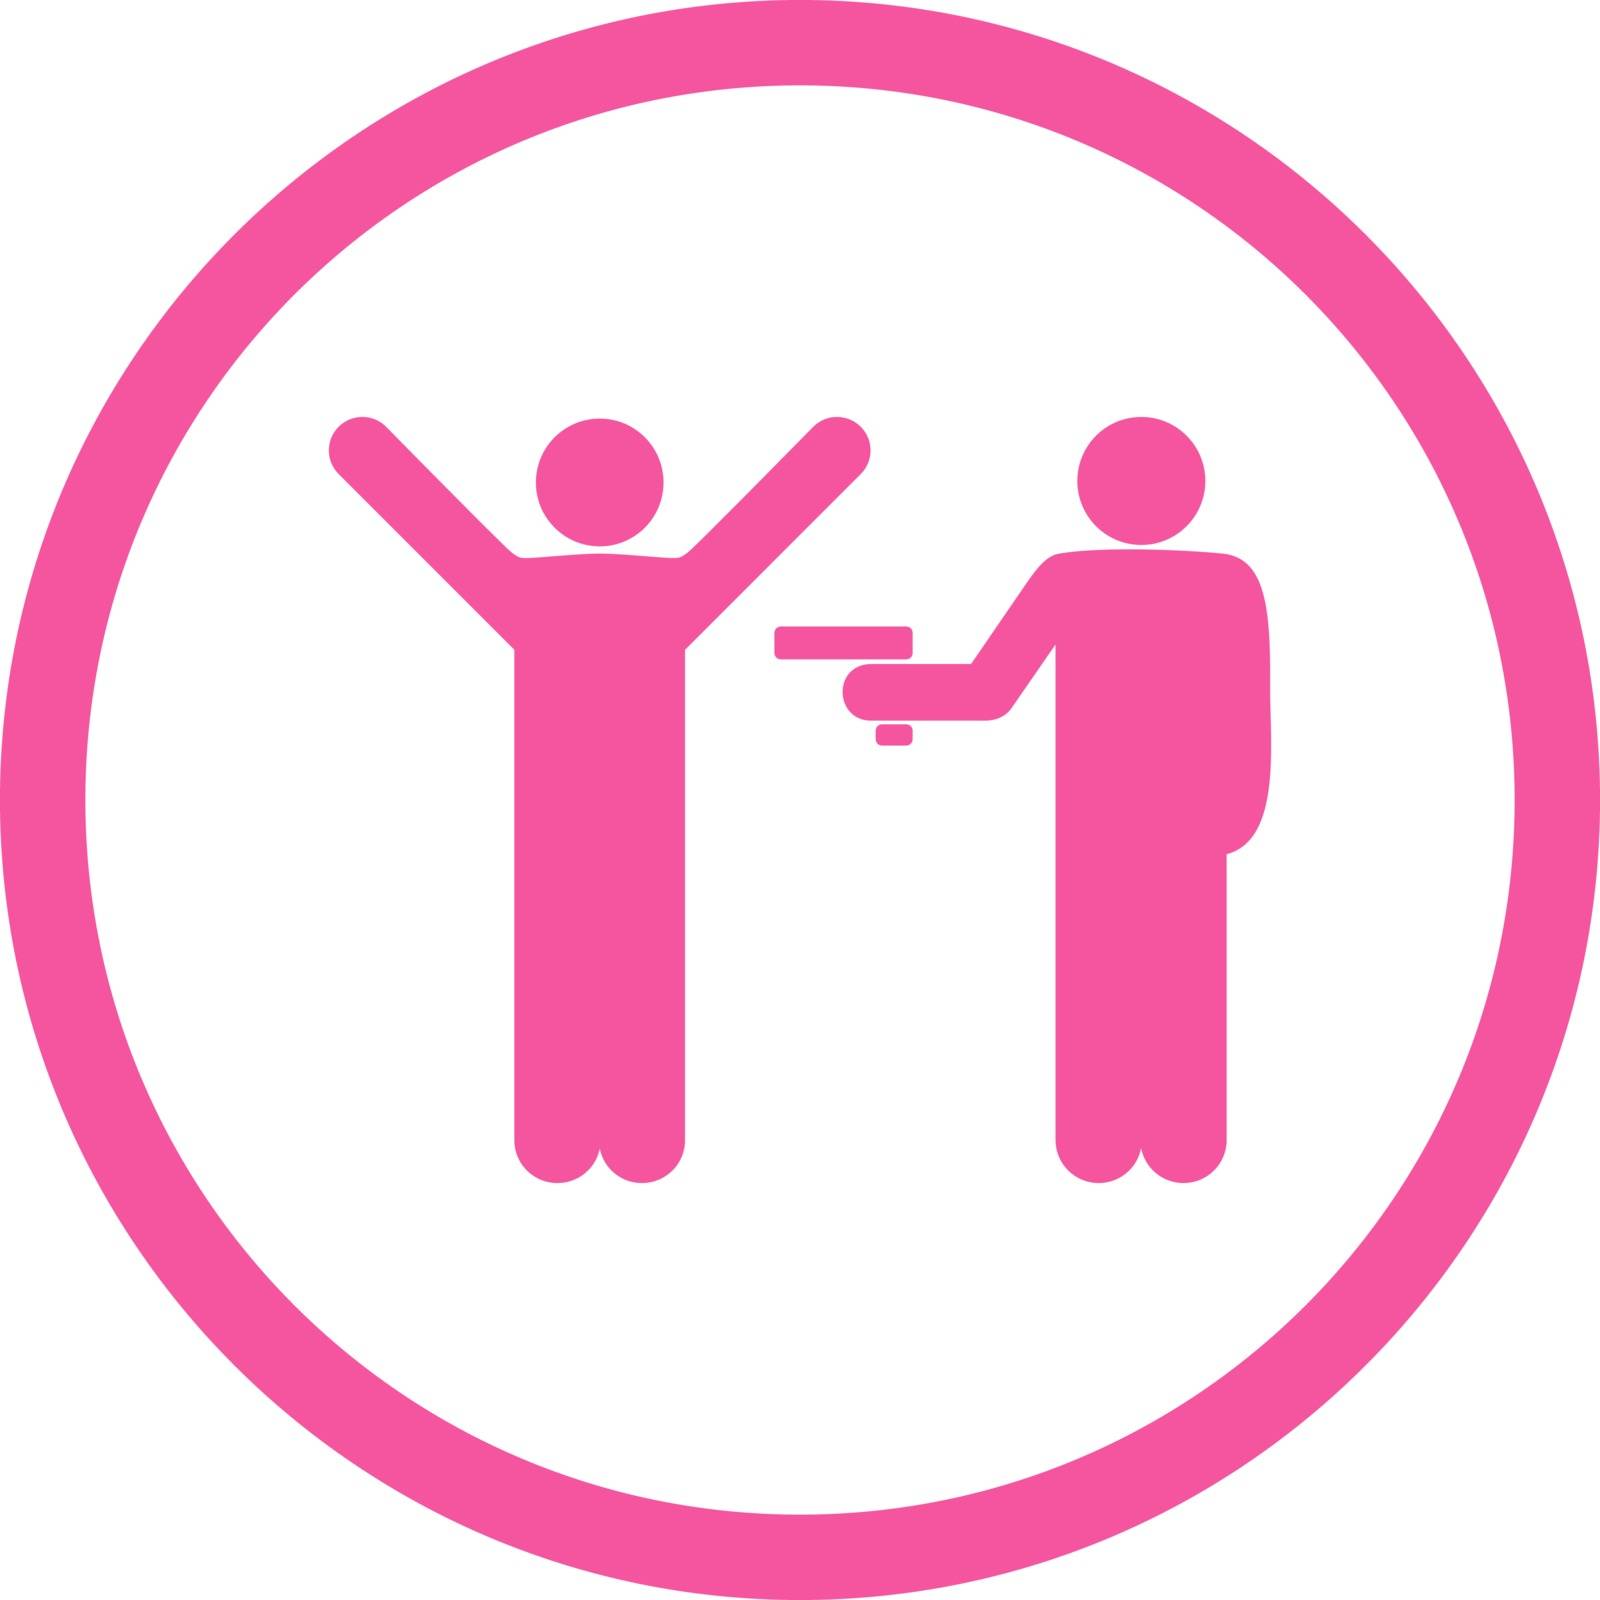 Crime vector icon. This rounded flat symbol is drawn with pink color on a white background.